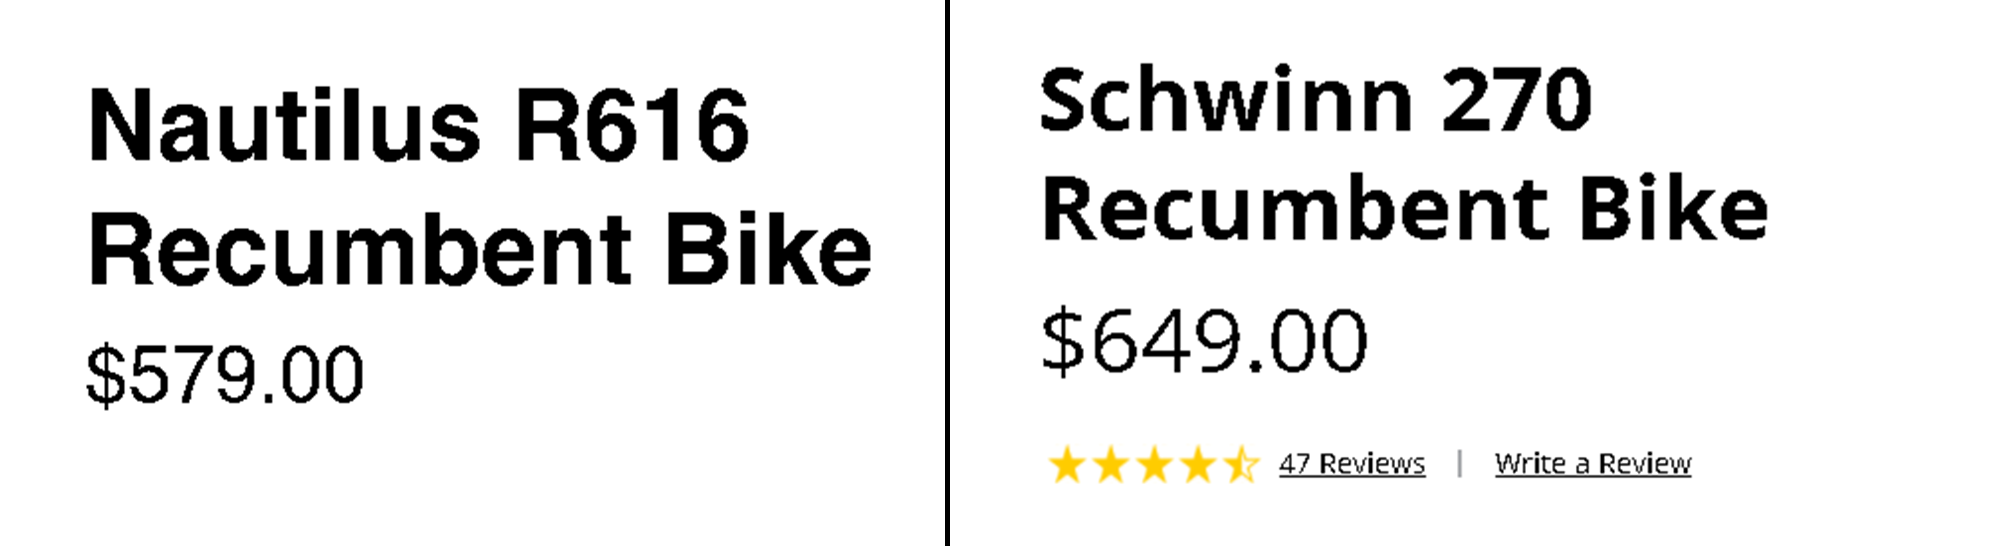 comparing the price of The Nautilus R616 and Schwinn 270